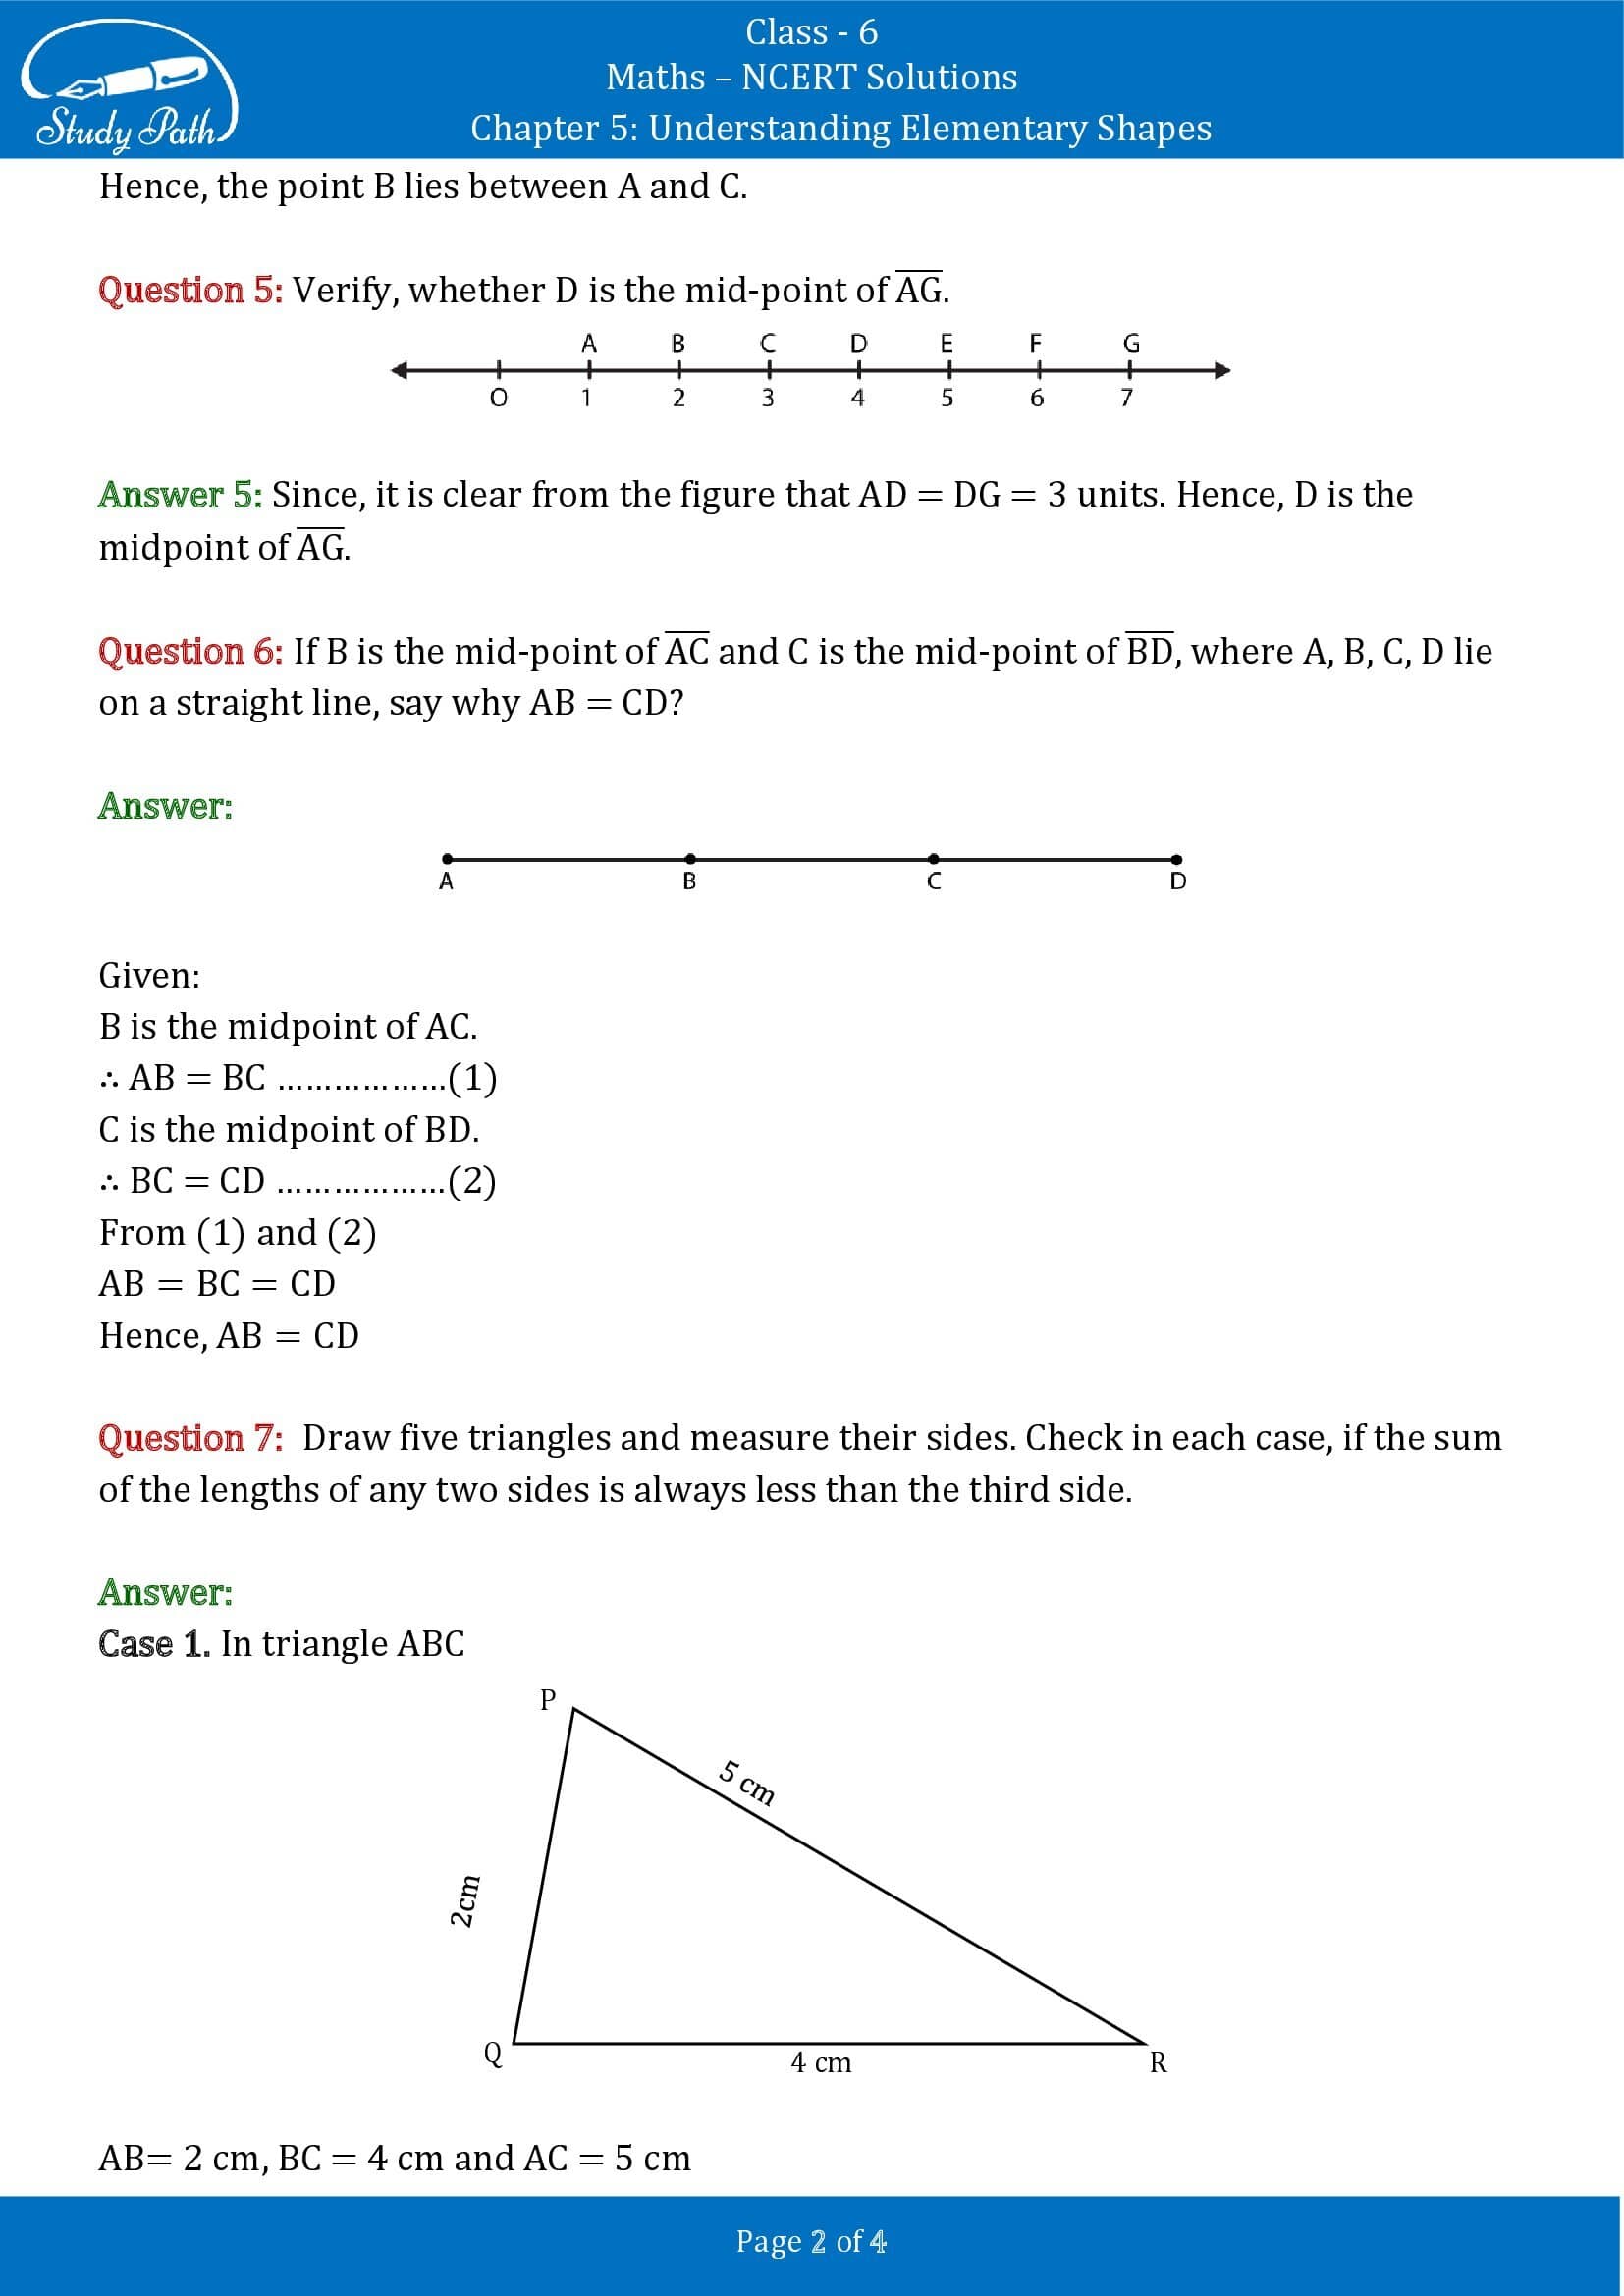 NCERT Solutions for Class 6 Maths Chapter 5 Understanding Elementary Shapes Exercise 5.1 00002